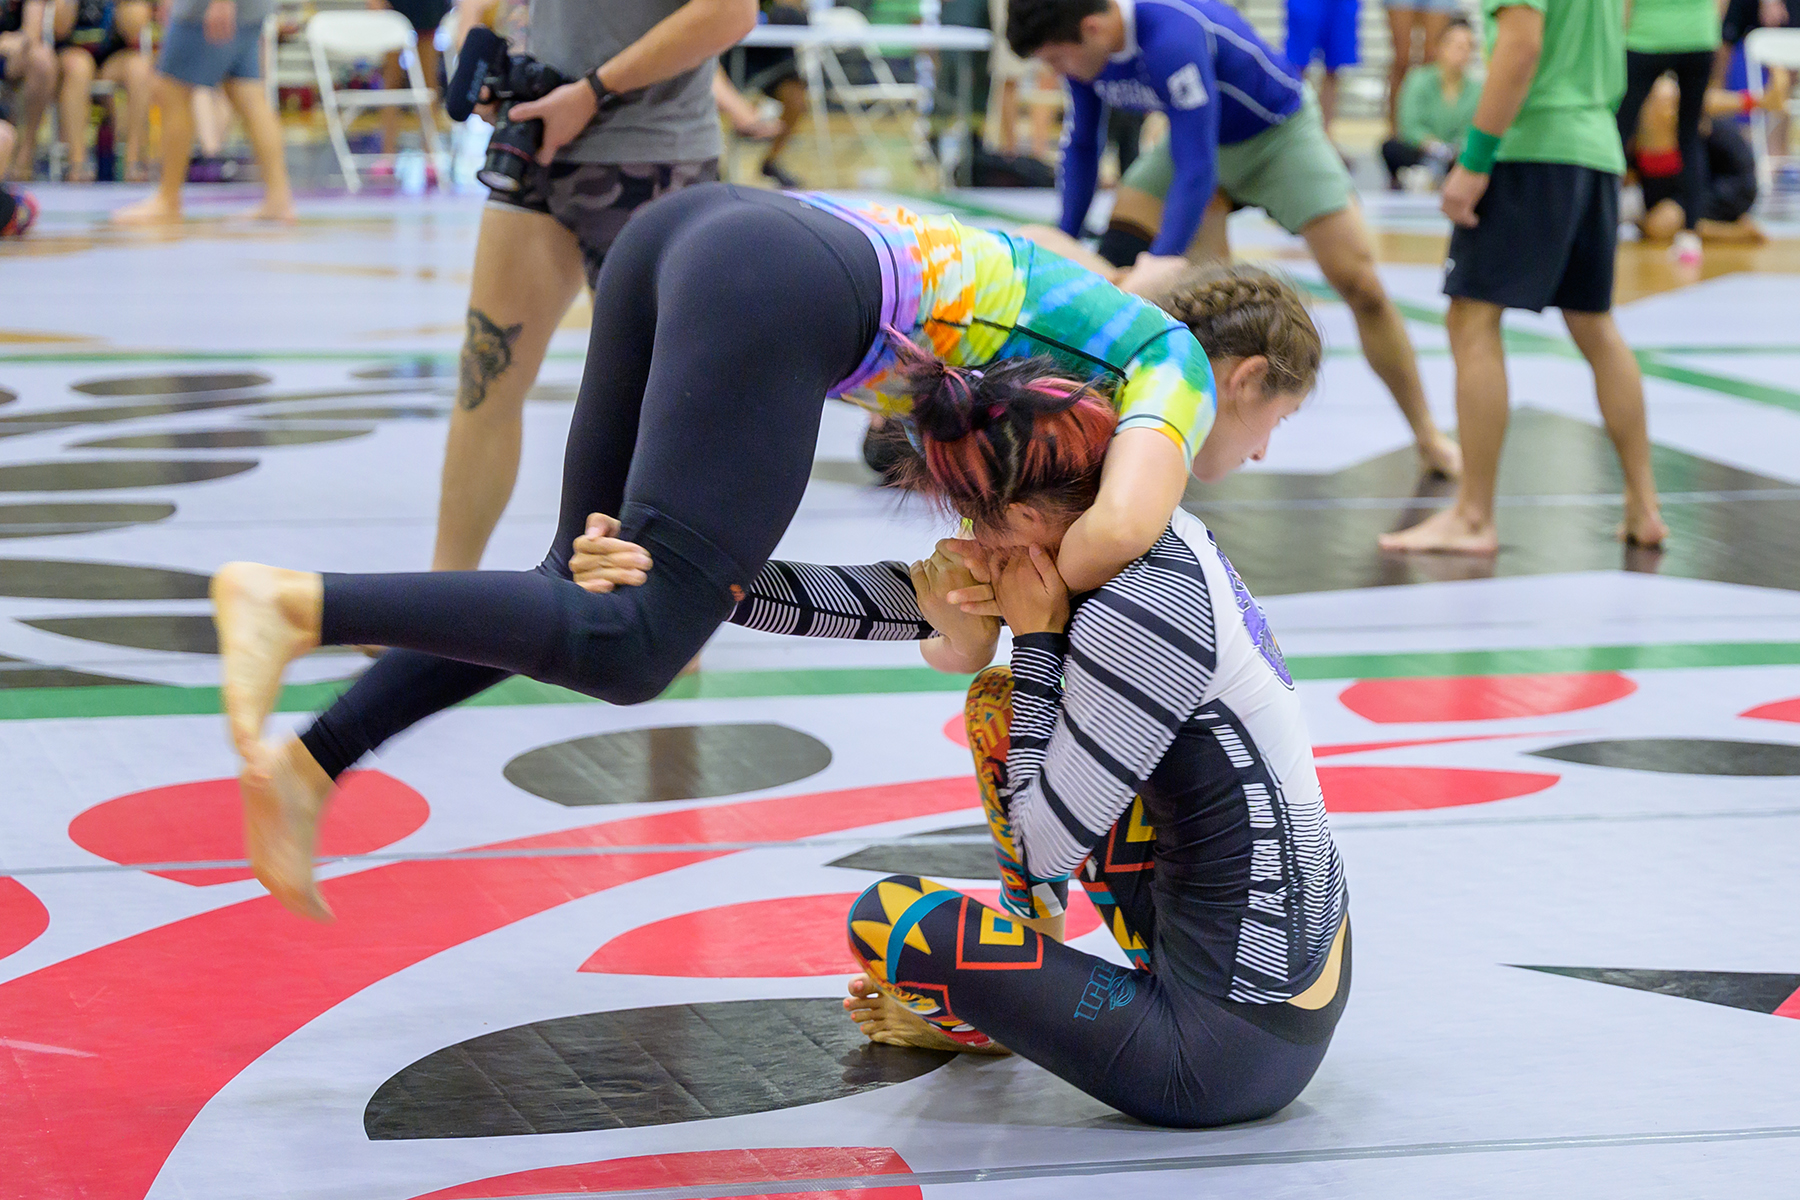 An image of two girls competing at the Easton Open, a Brazlian jiu-jitsu competition for all Easton academies in Colorado.